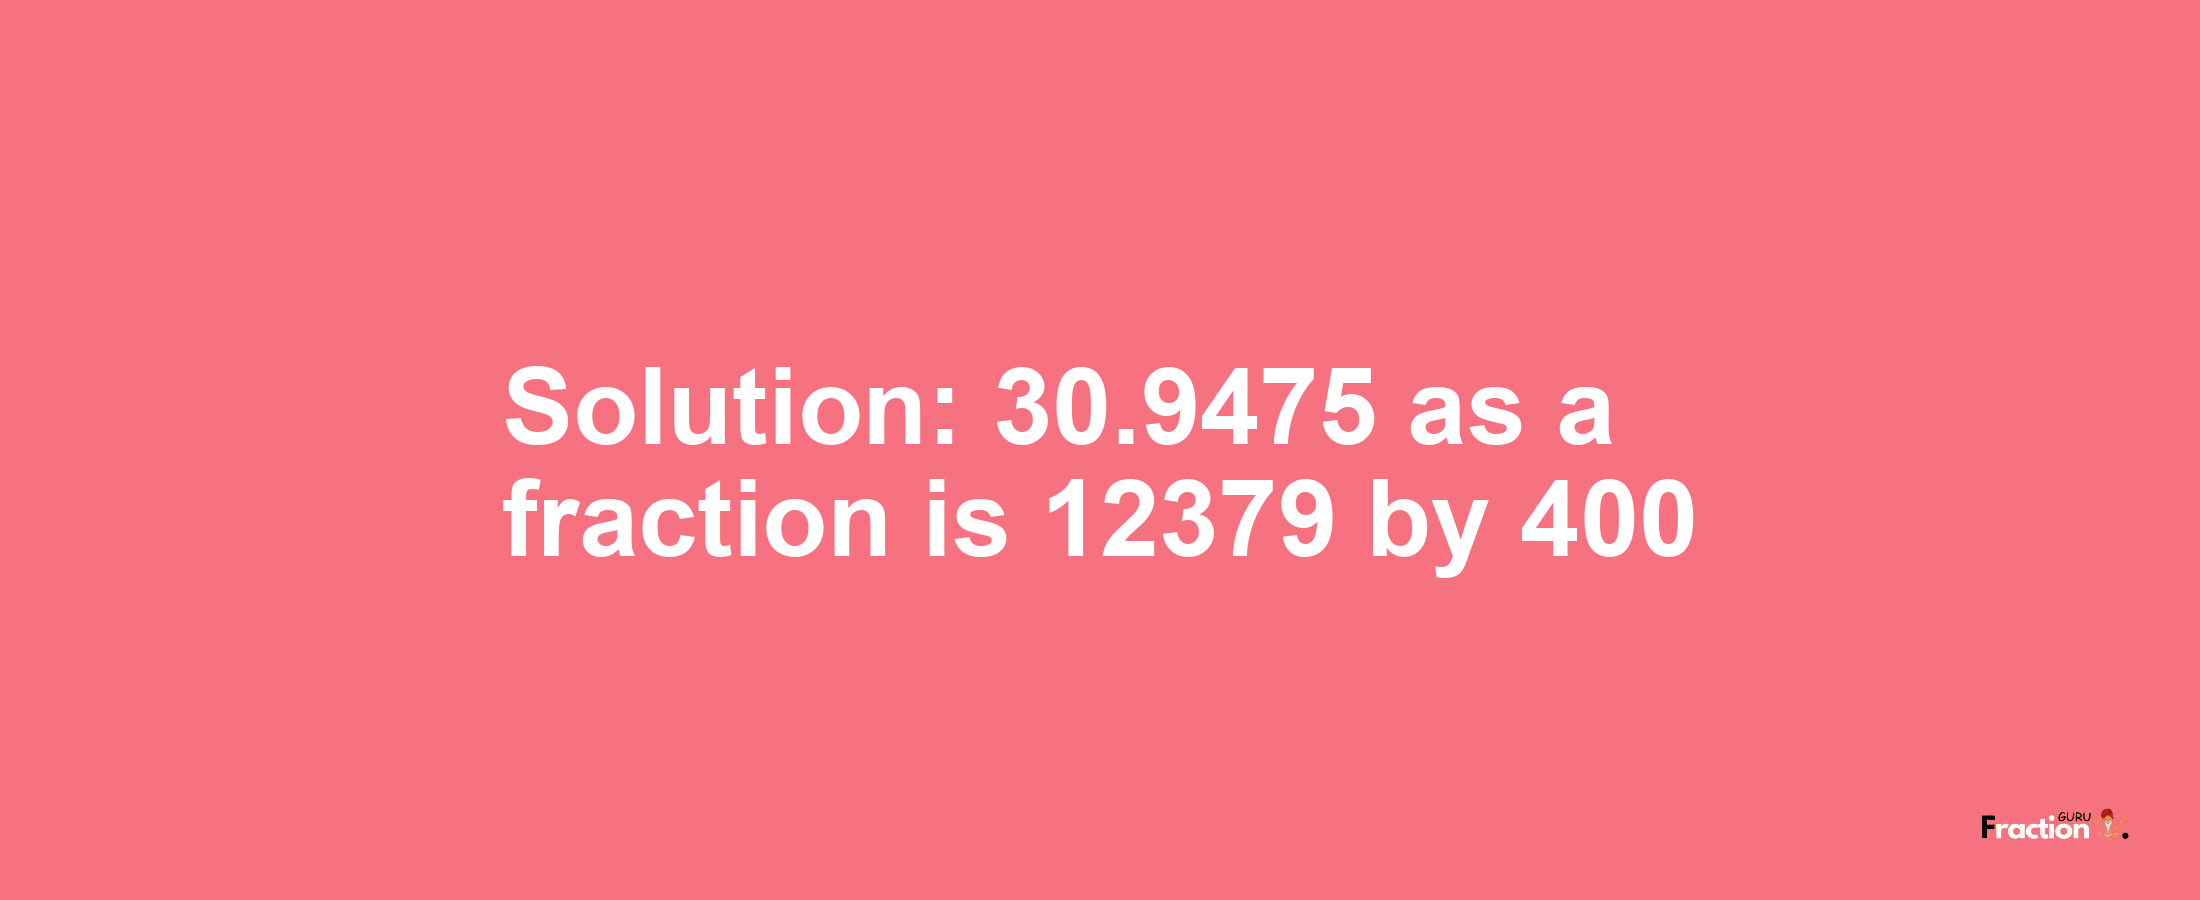 Solution:30.9475 as a fraction is 12379/400